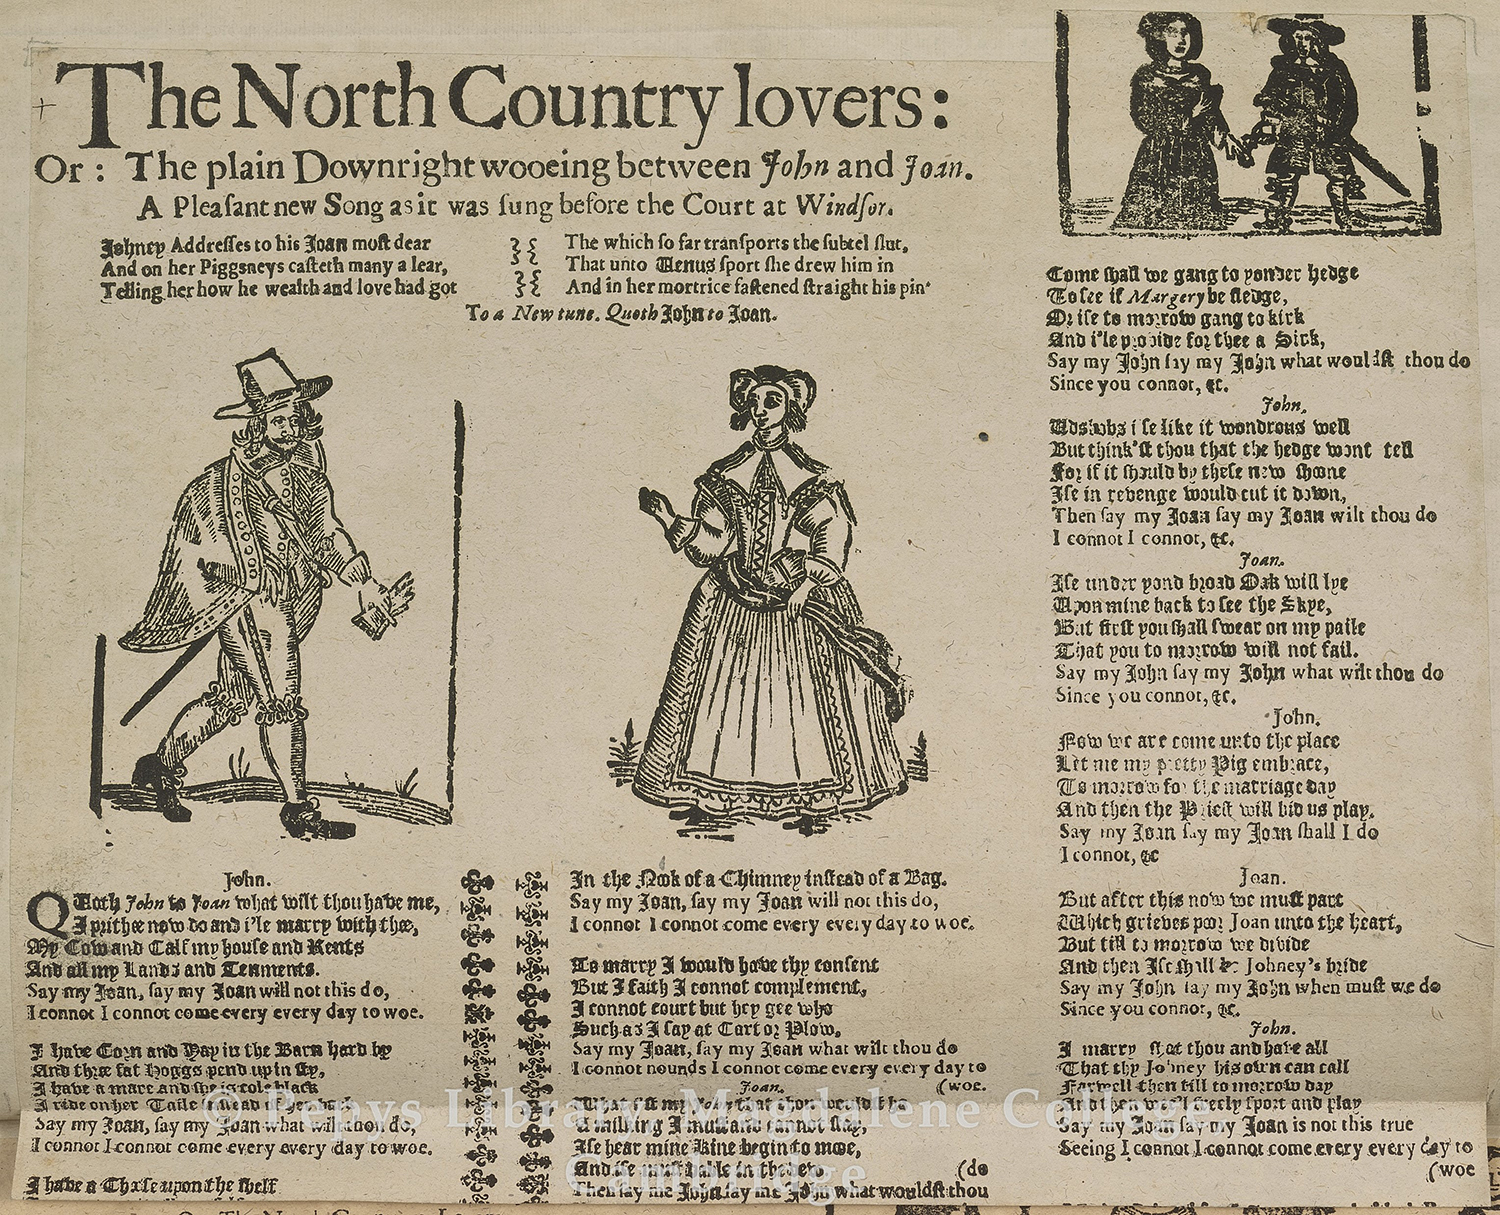 Broadside Ballad The North Country Lovers (‘John and Joan’) - Pepys Ballads IV.24 (c. 1685).